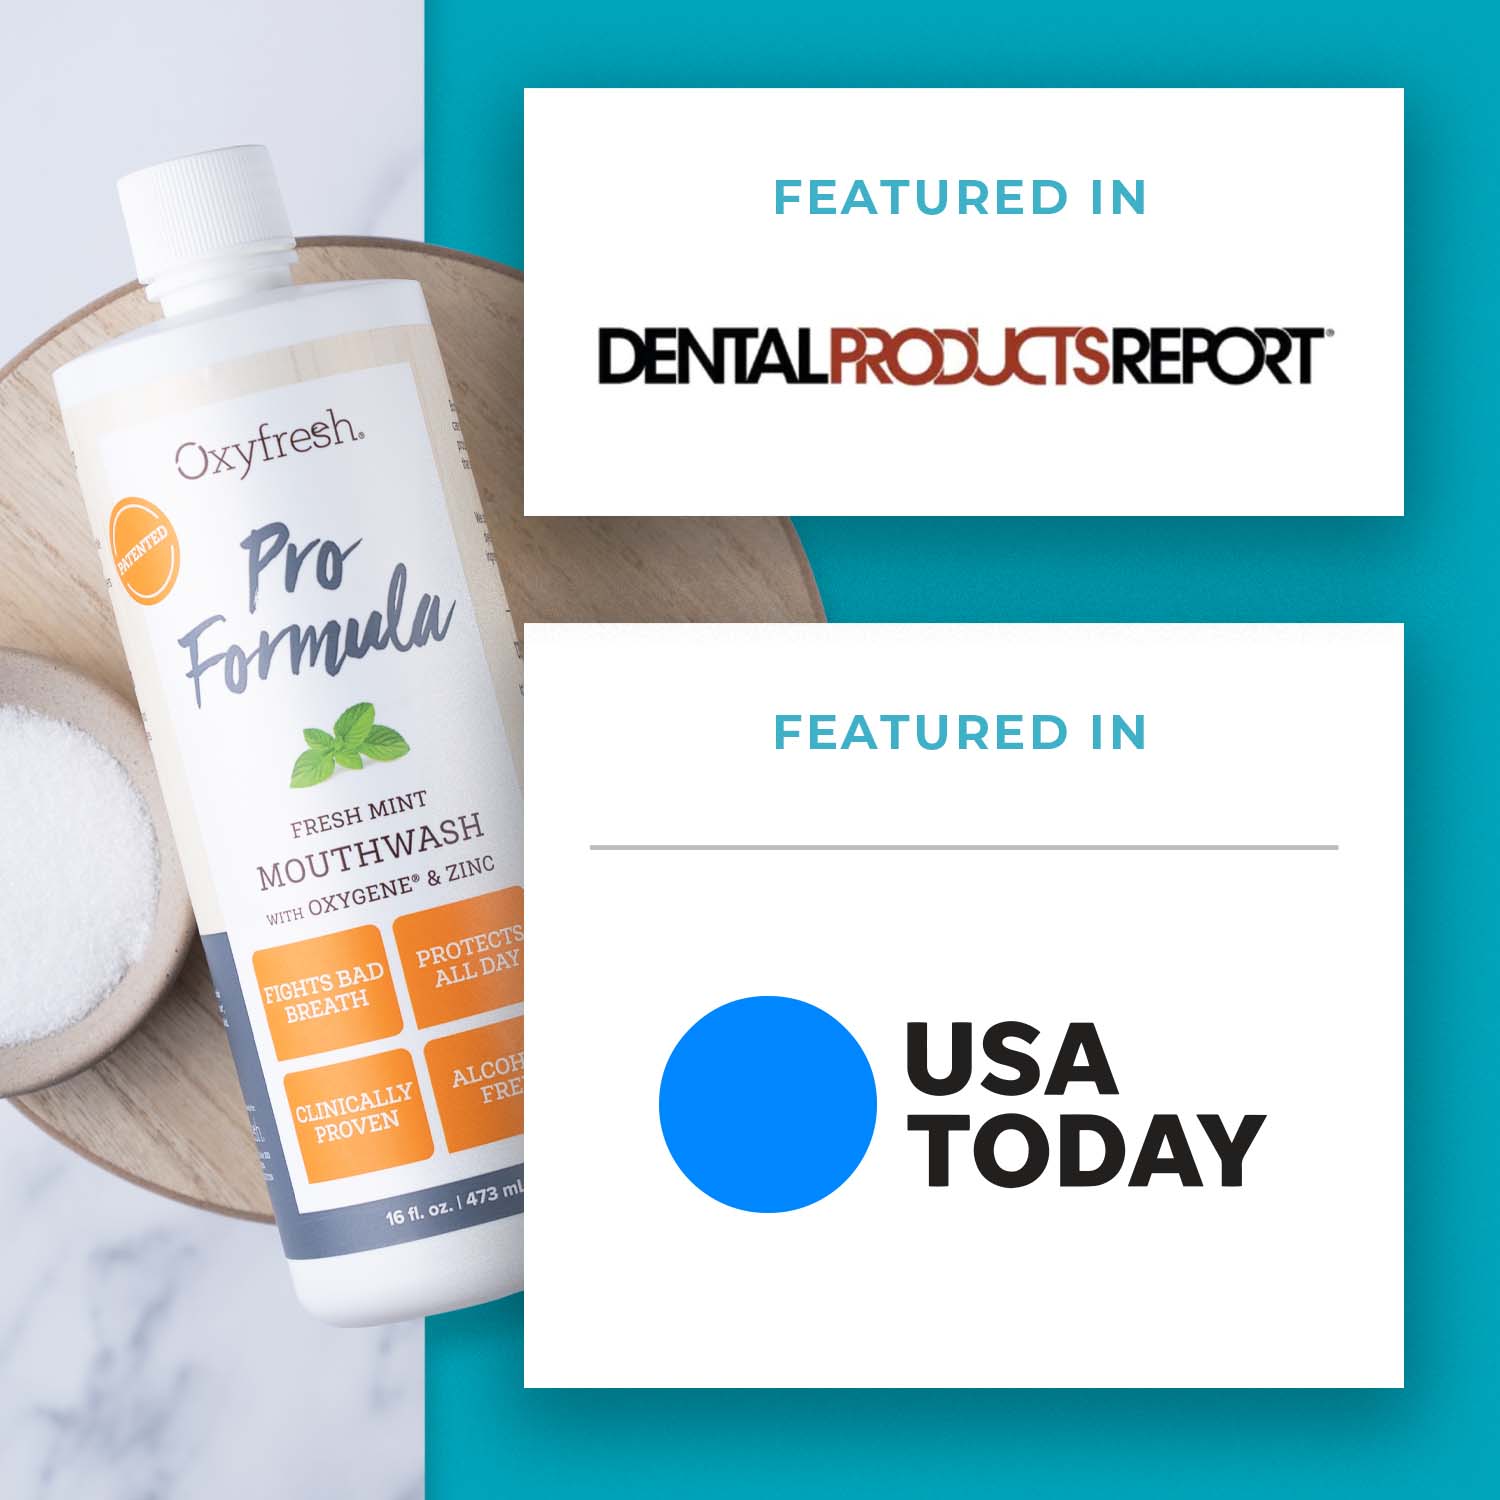 oxyfresh-pro-formula-zinc-mouthwash-featured-in-dental-products-report-and-USA-today